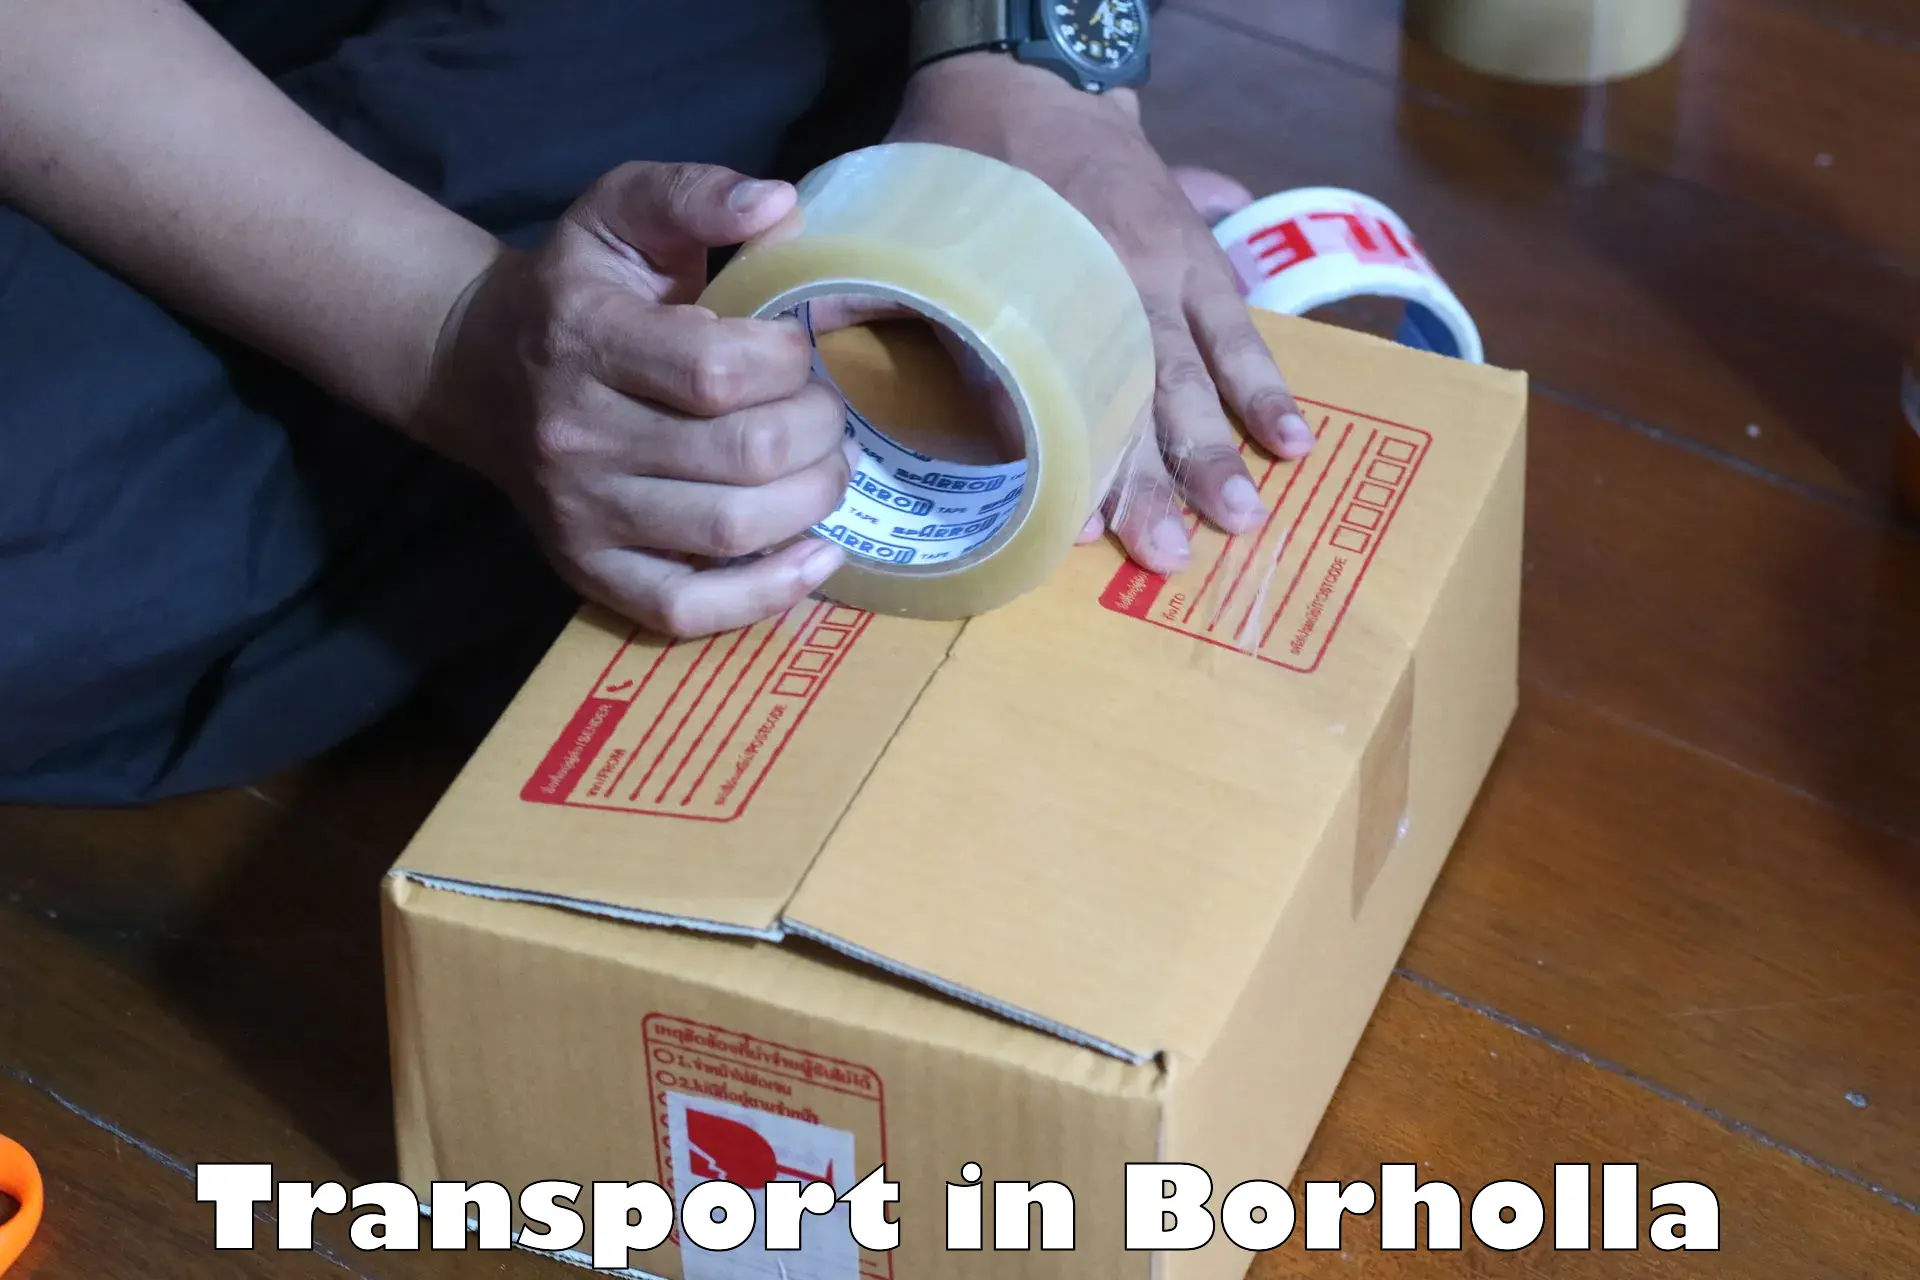 Express transport services in Borholla